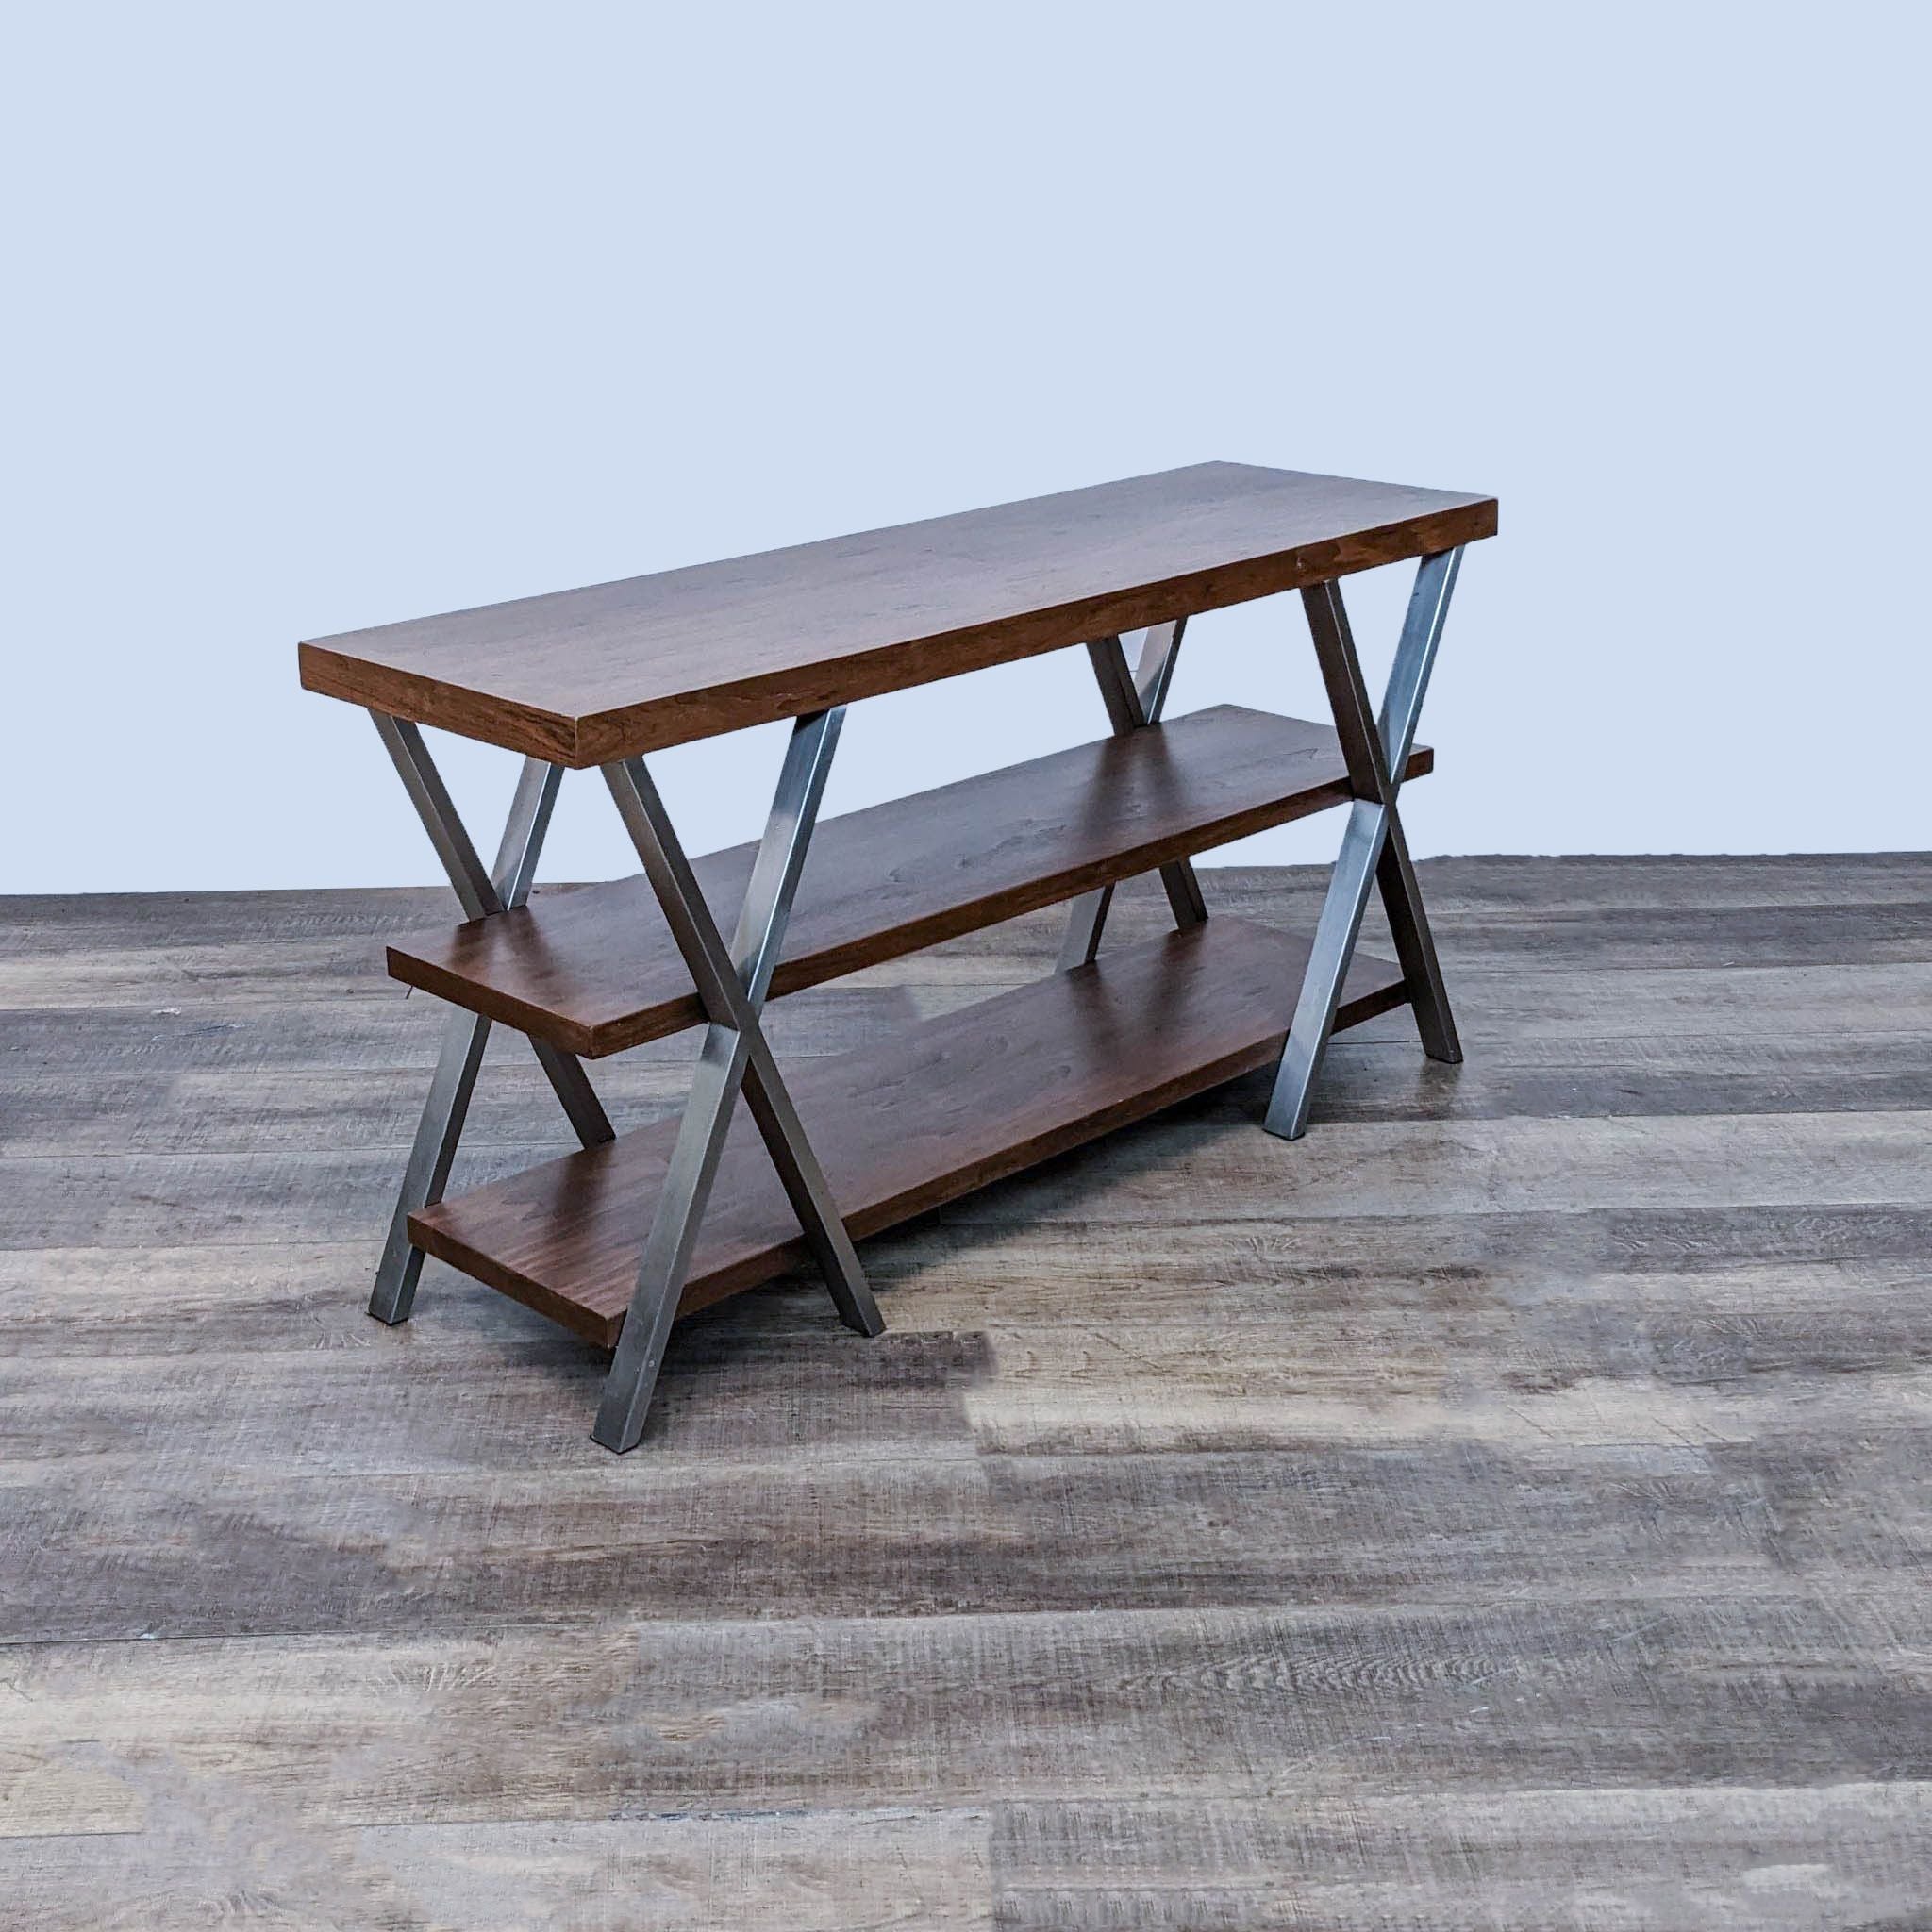 Reperch branded three-tiered side table with geometric side X framework and a chrome metal frame on a wooden floor.